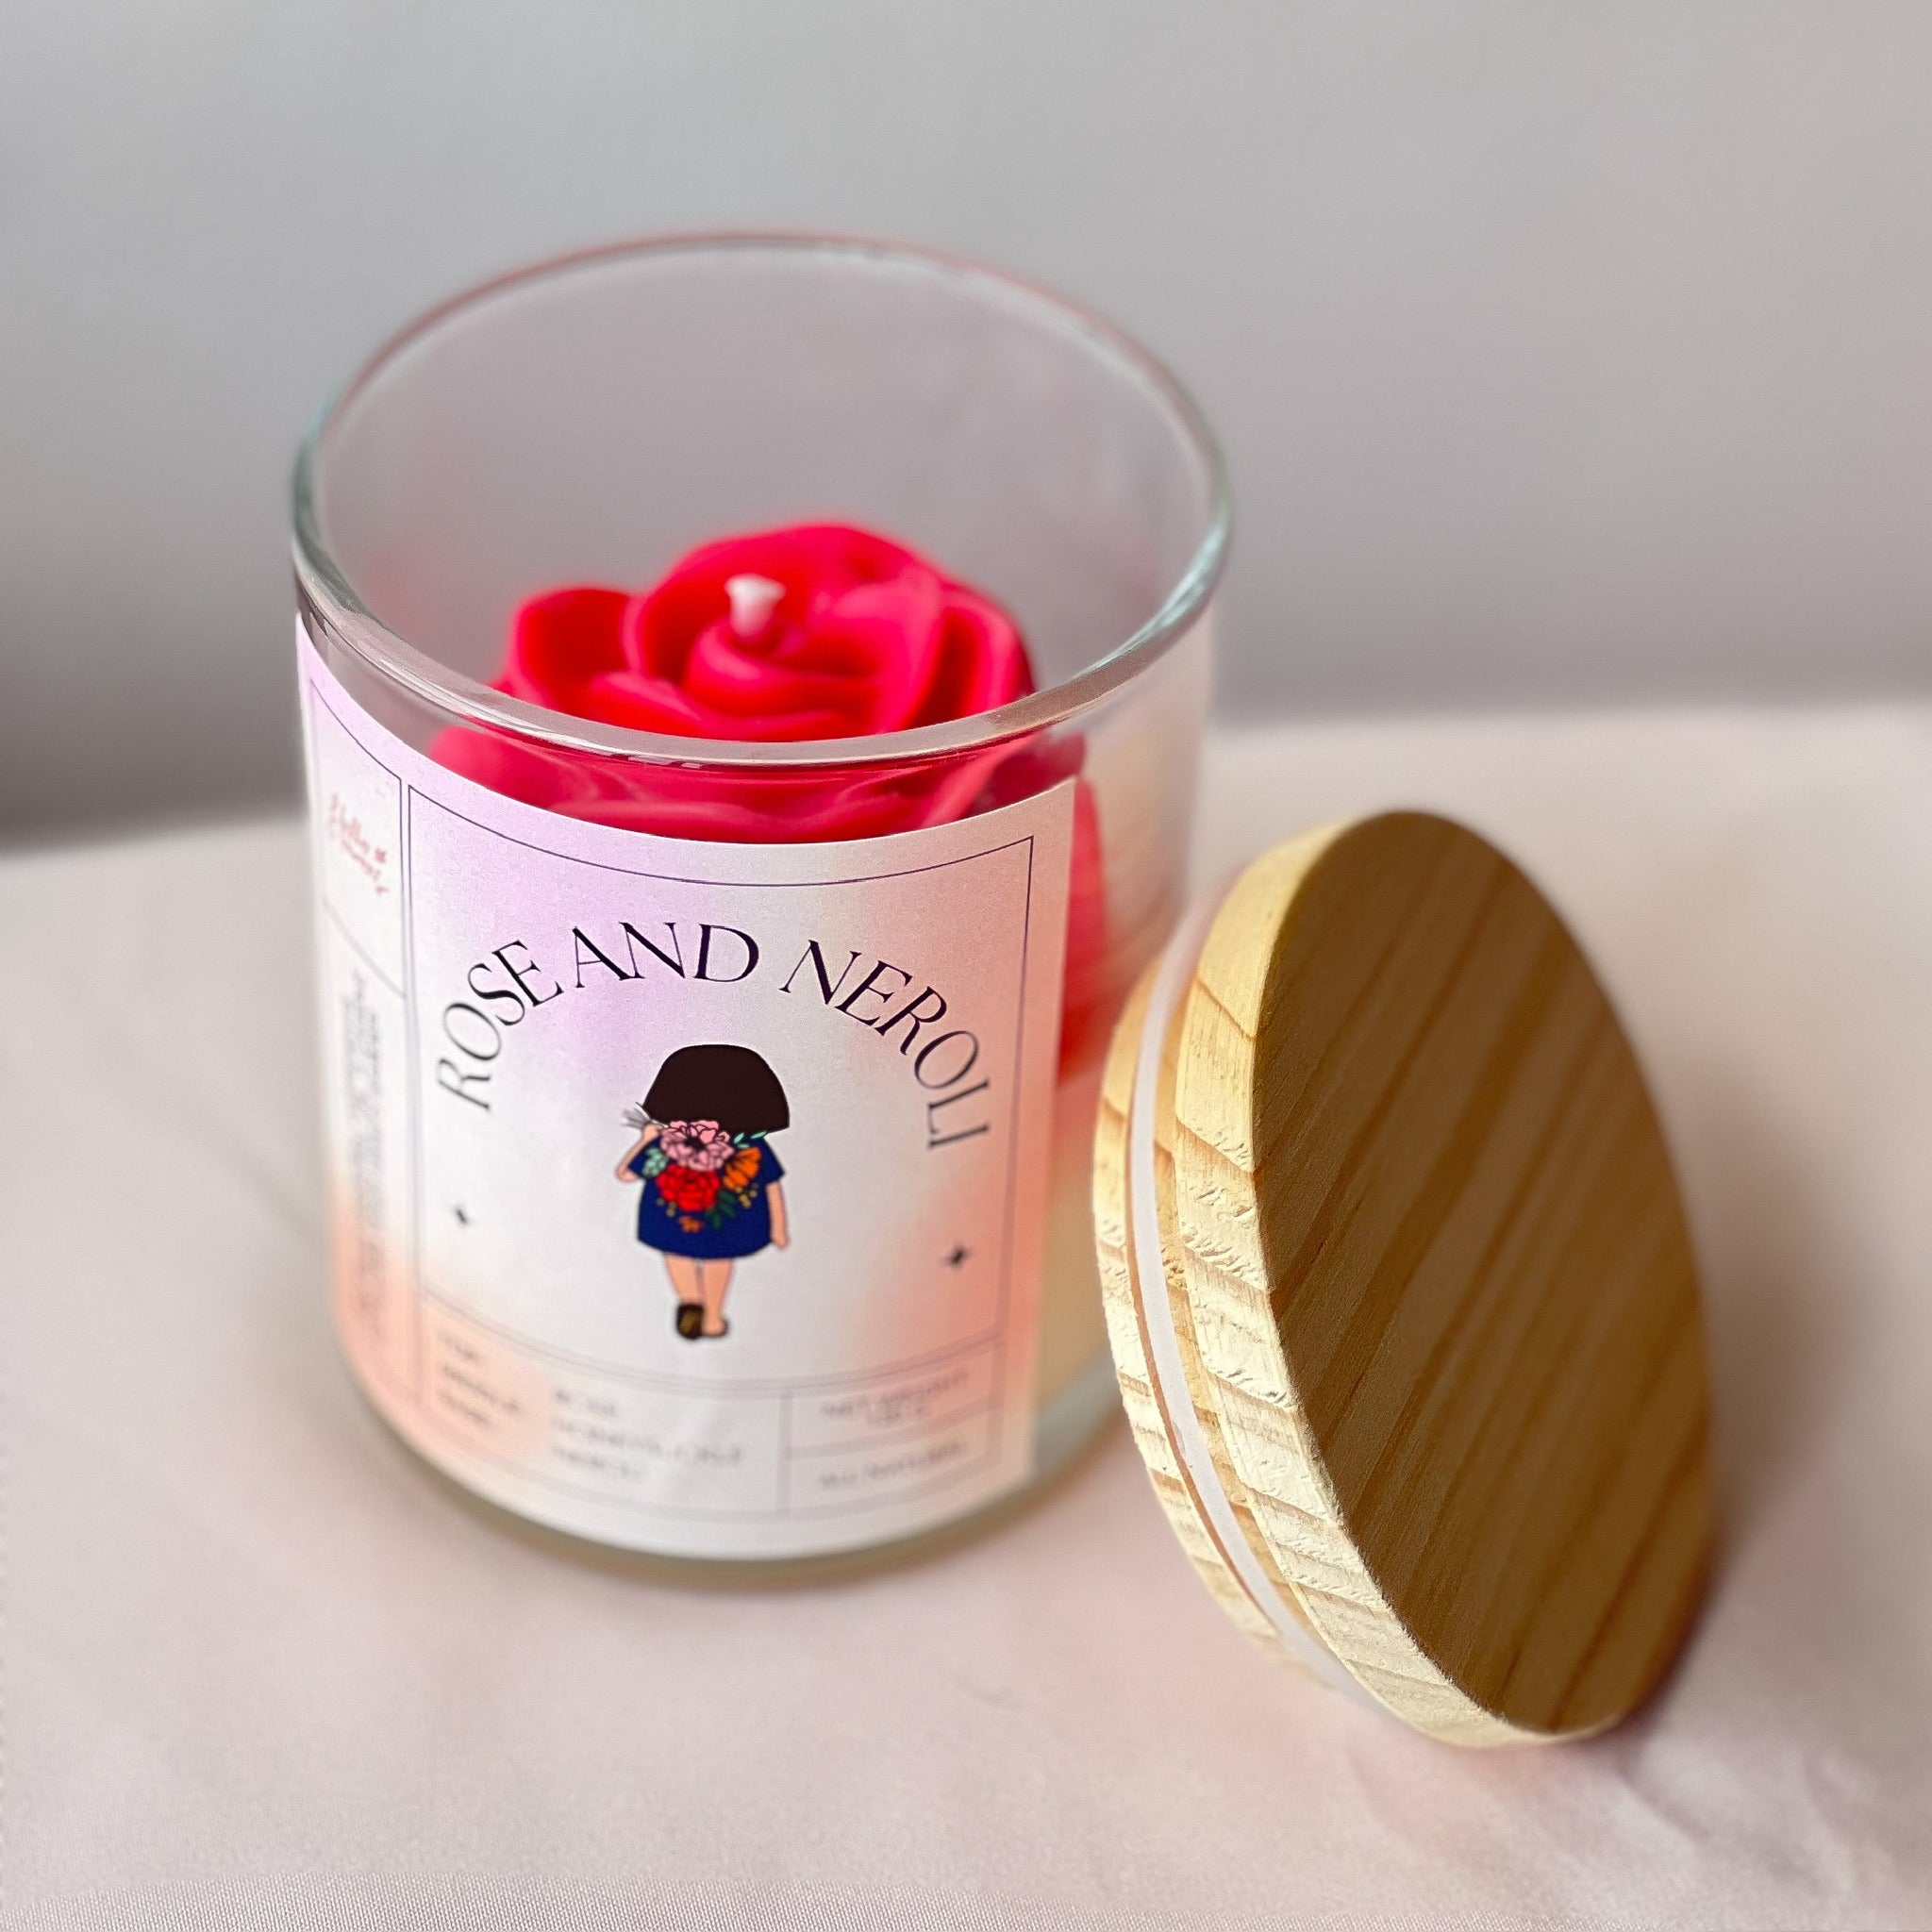 Hello Flowers! Rose Candle (Rose &amp; Neroli Essential Oil)